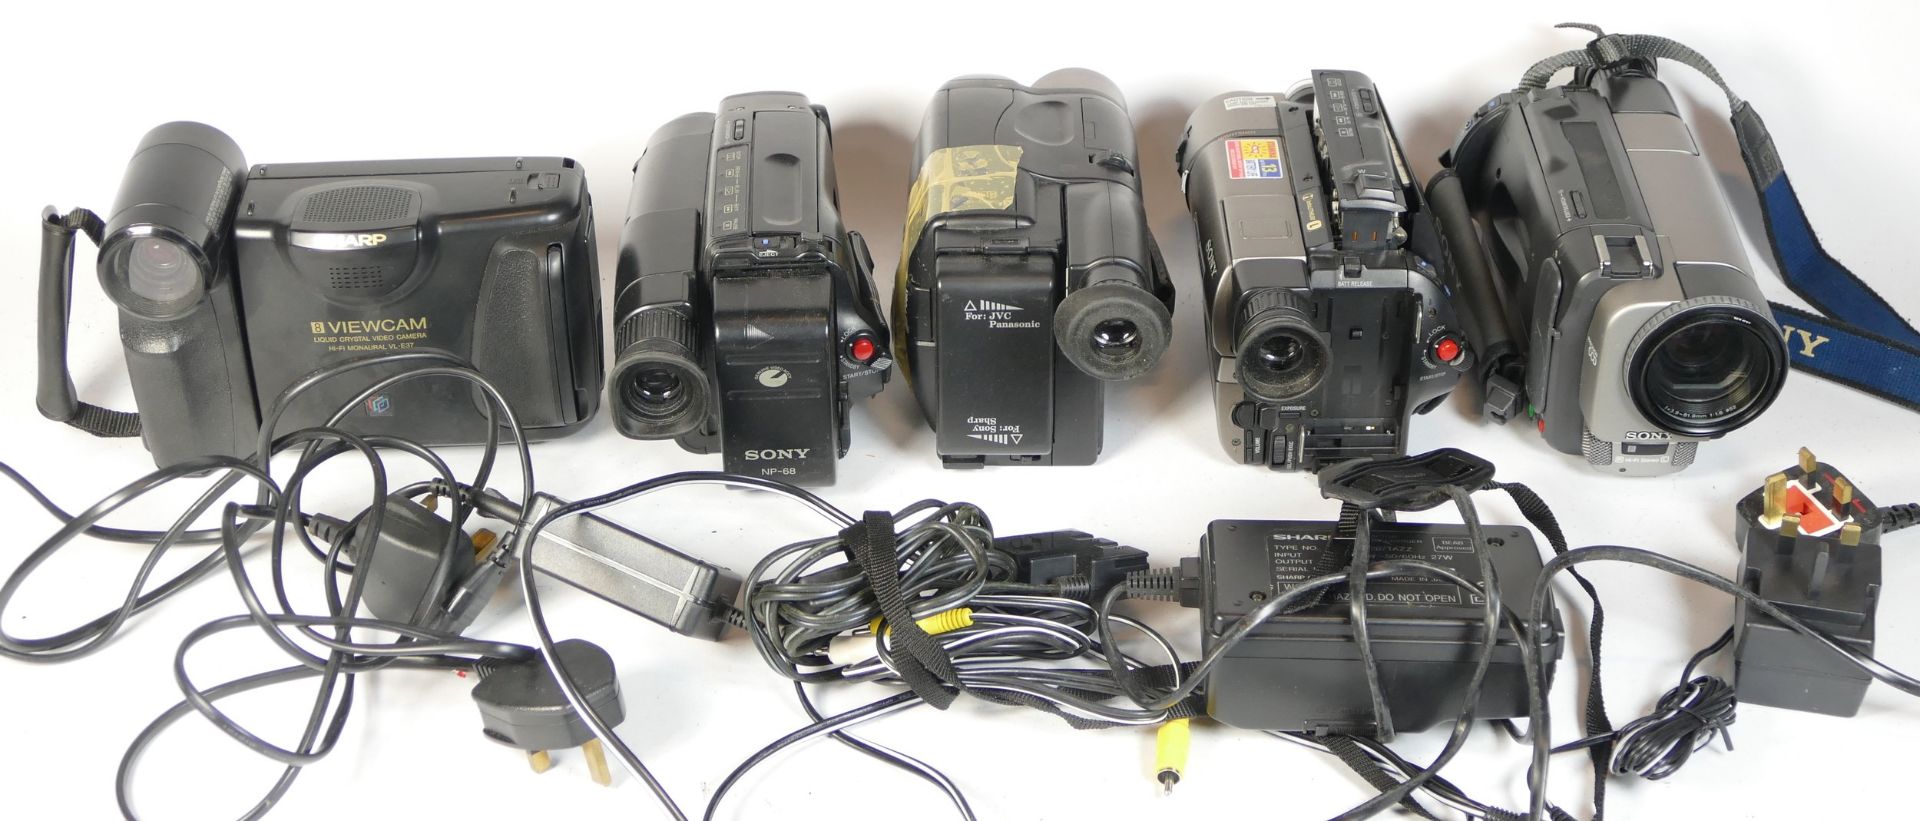 Five video camcorders comprising of a Sony CCD-TRV36E, a JVC GR-AX270E, a Sharp VL-E37H, a Sony